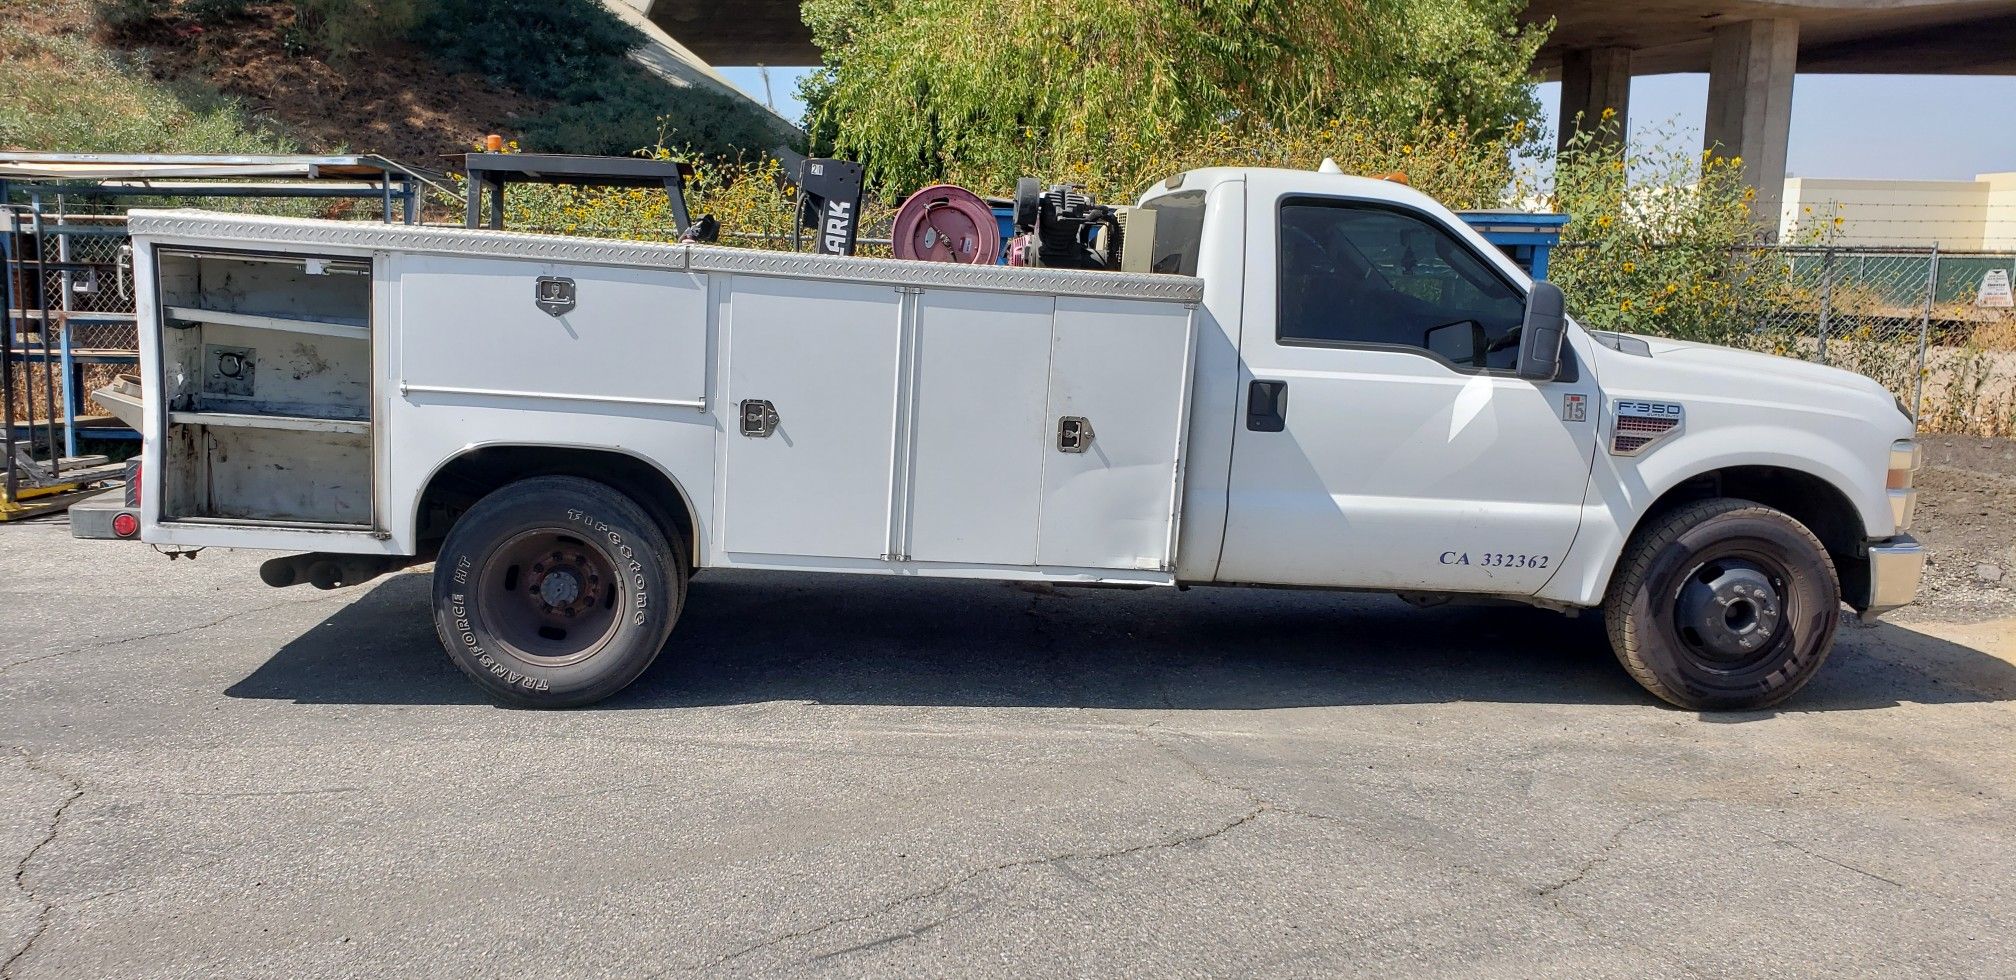 2010 Ford F350 service truck